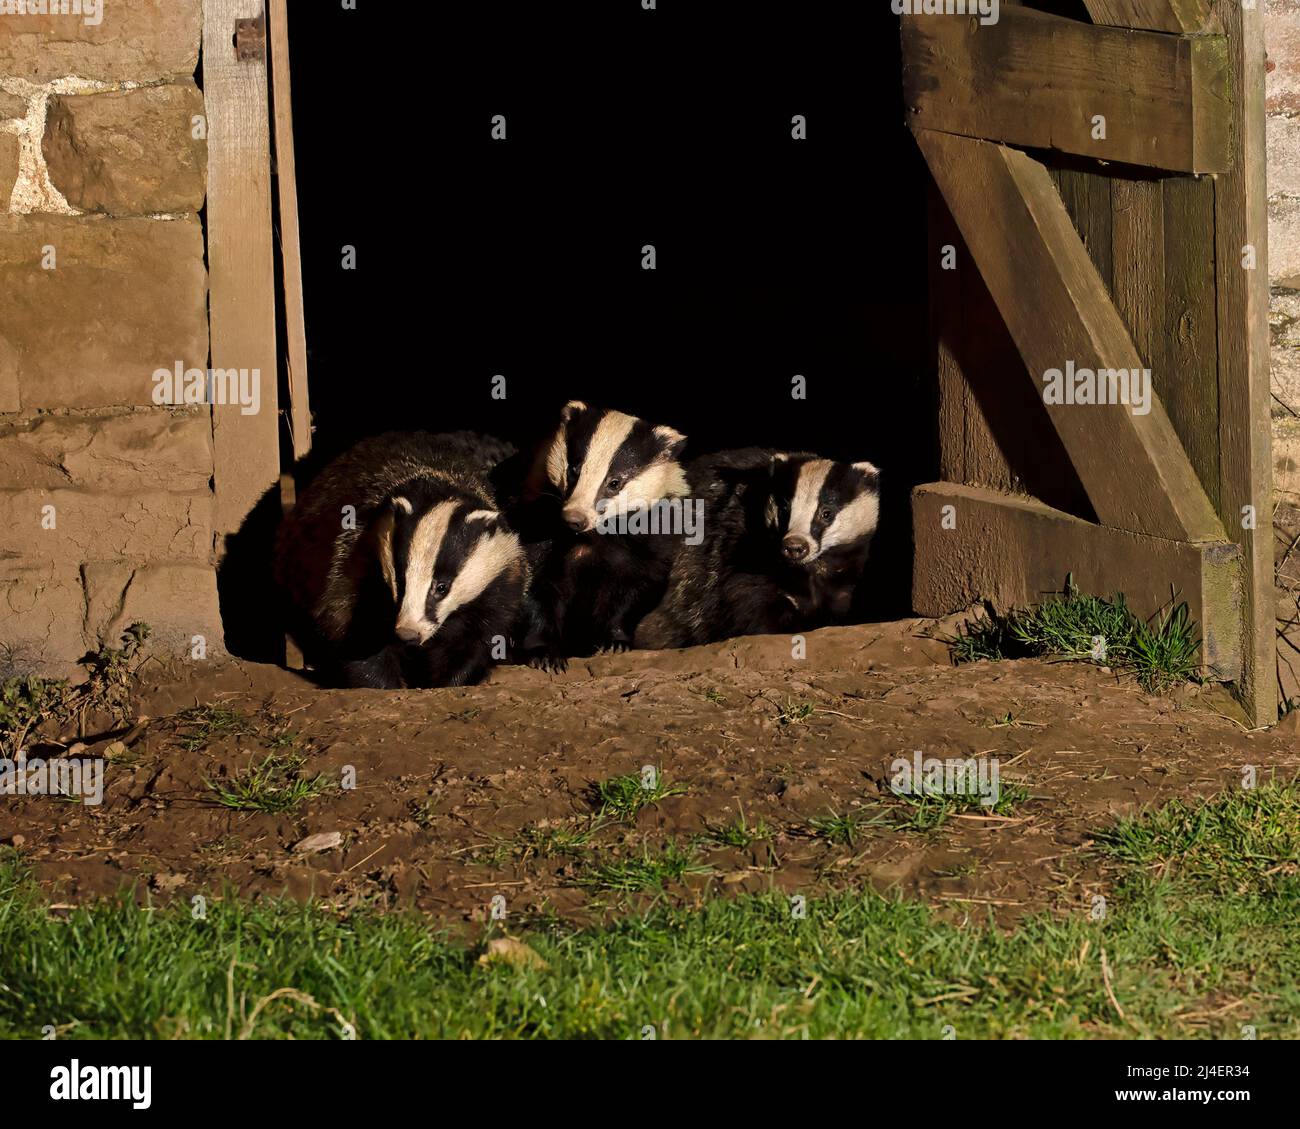 European Badger, Meles meles. A badger family, cete, has a nest, sett, inside an abandoned barn in Wensleydale, Yorkshire Dales National Park. Three b Stock Photo